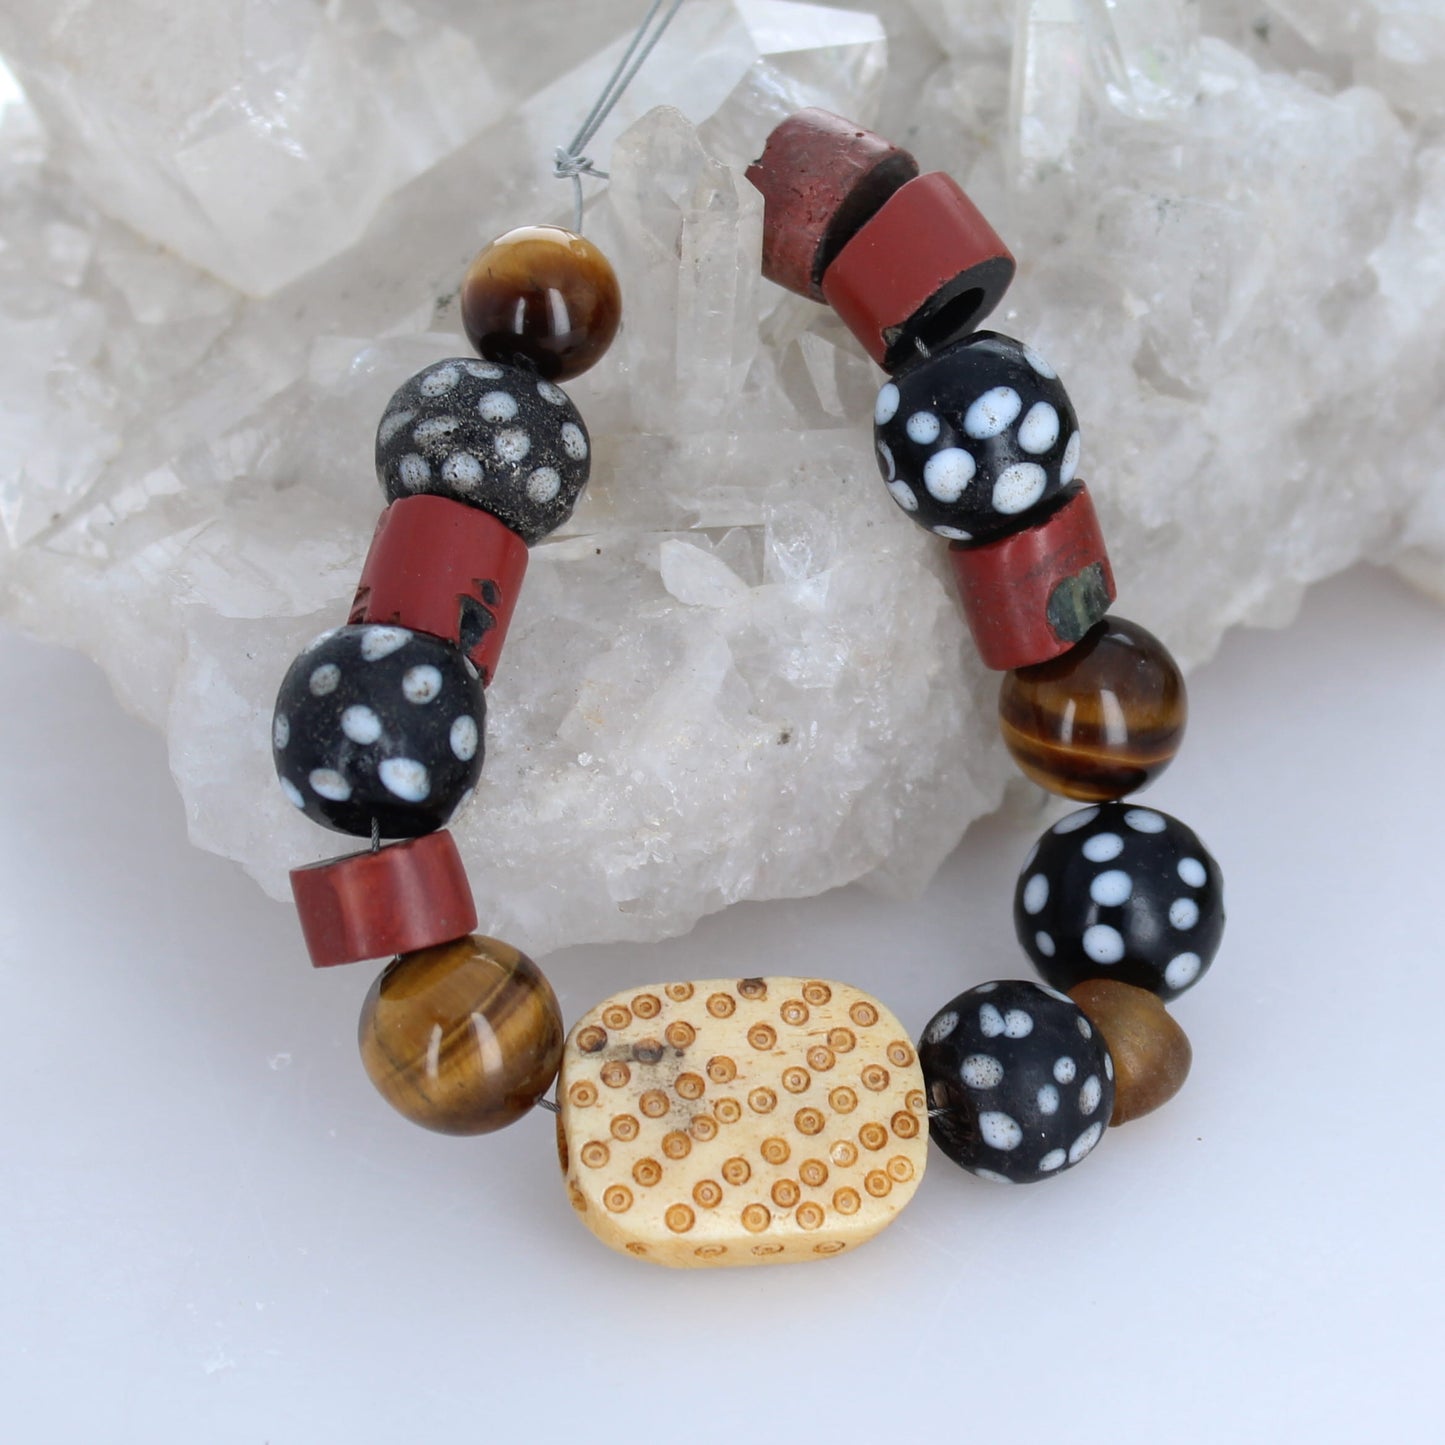 Antique Venitian African Trade Beads 6.5" Skunk and Red Heart Beads